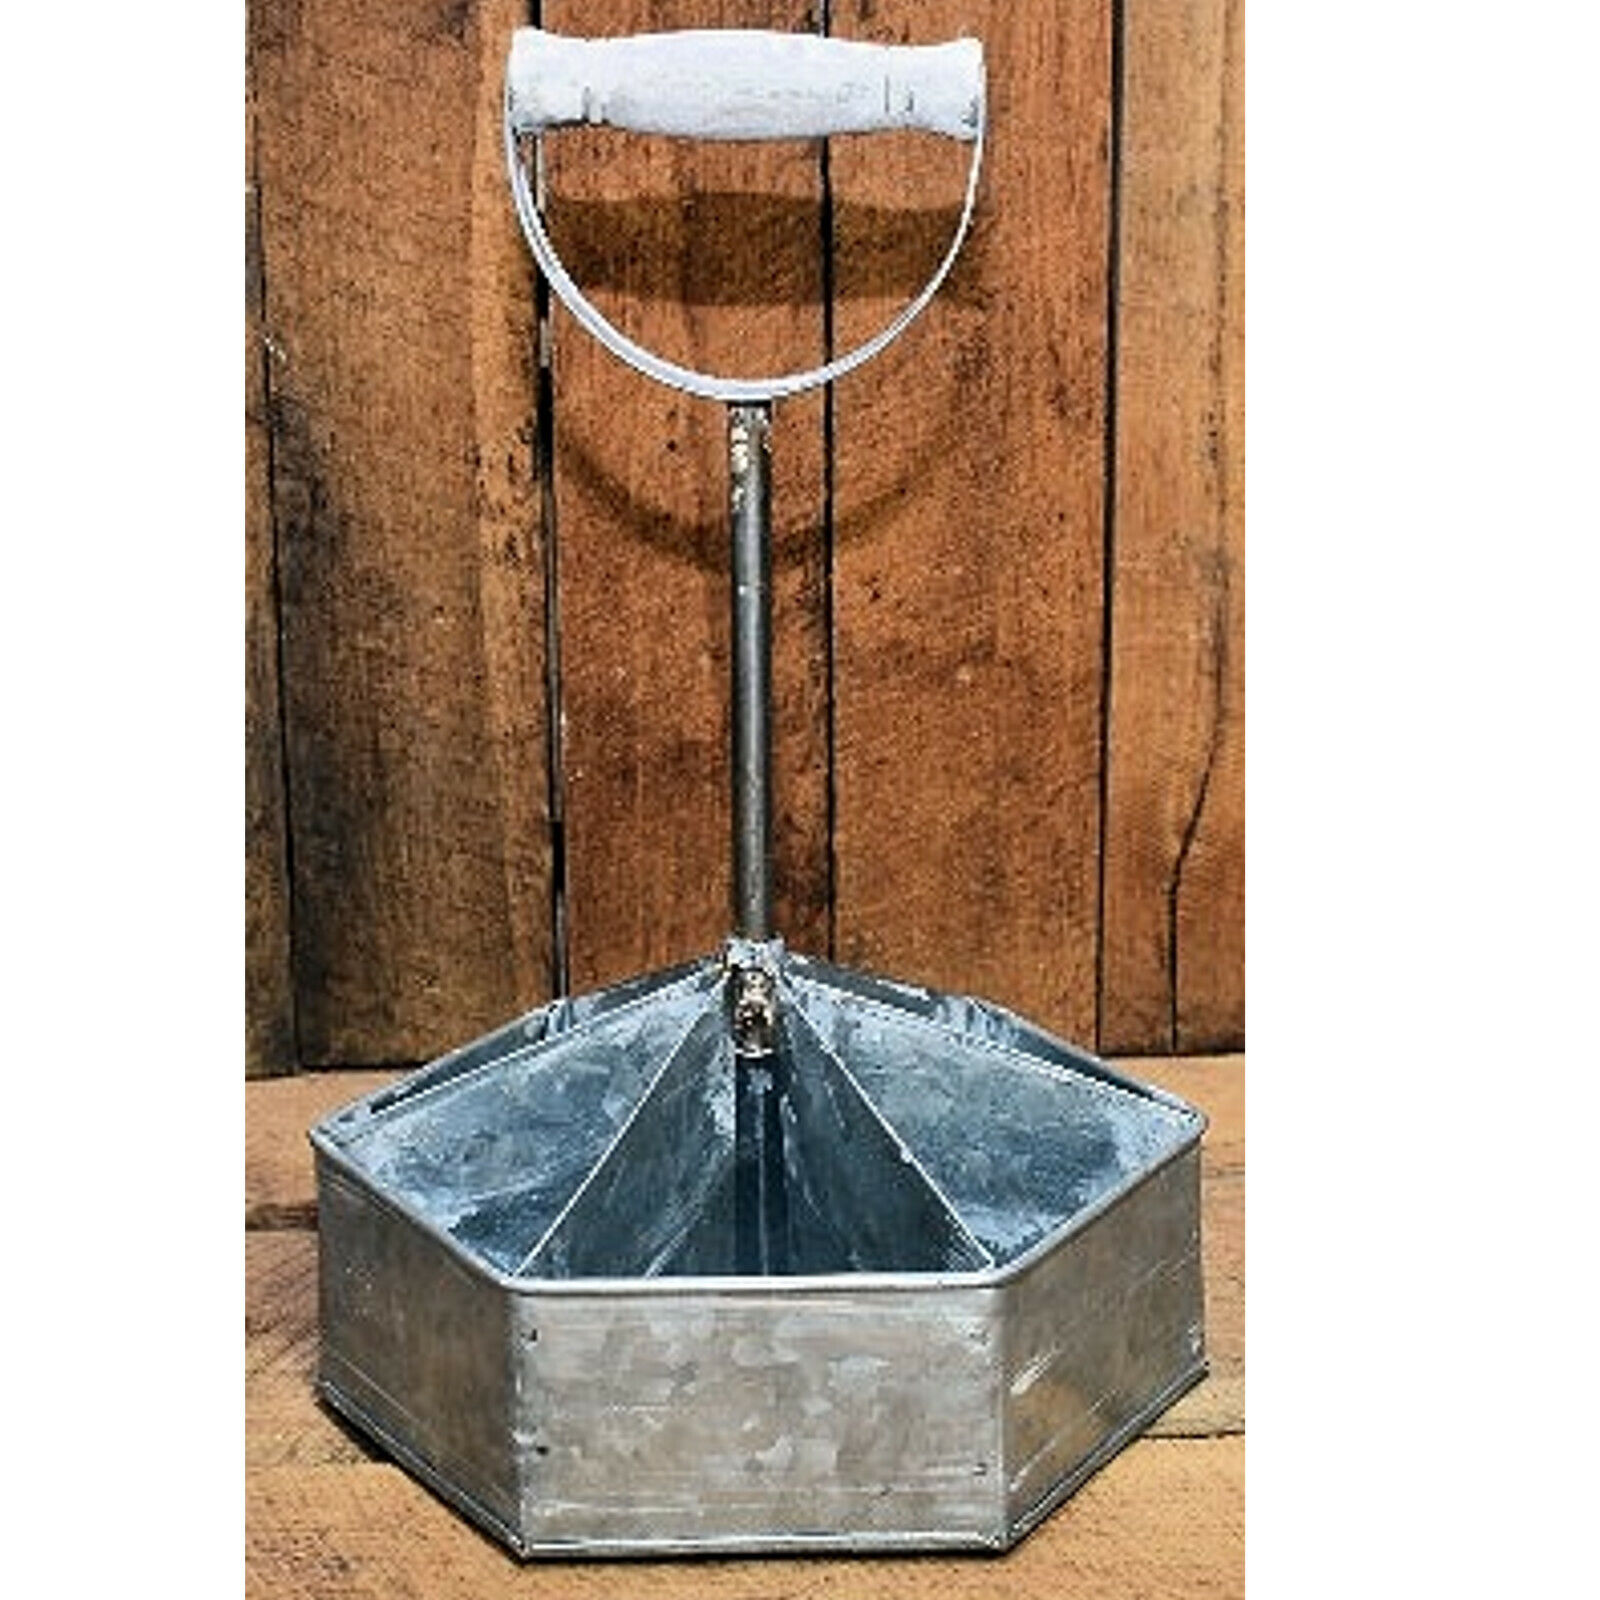 NEW Galvanized Industrial Metal Caddy Handle 6 Wedge Sections Farmhouse Garage 